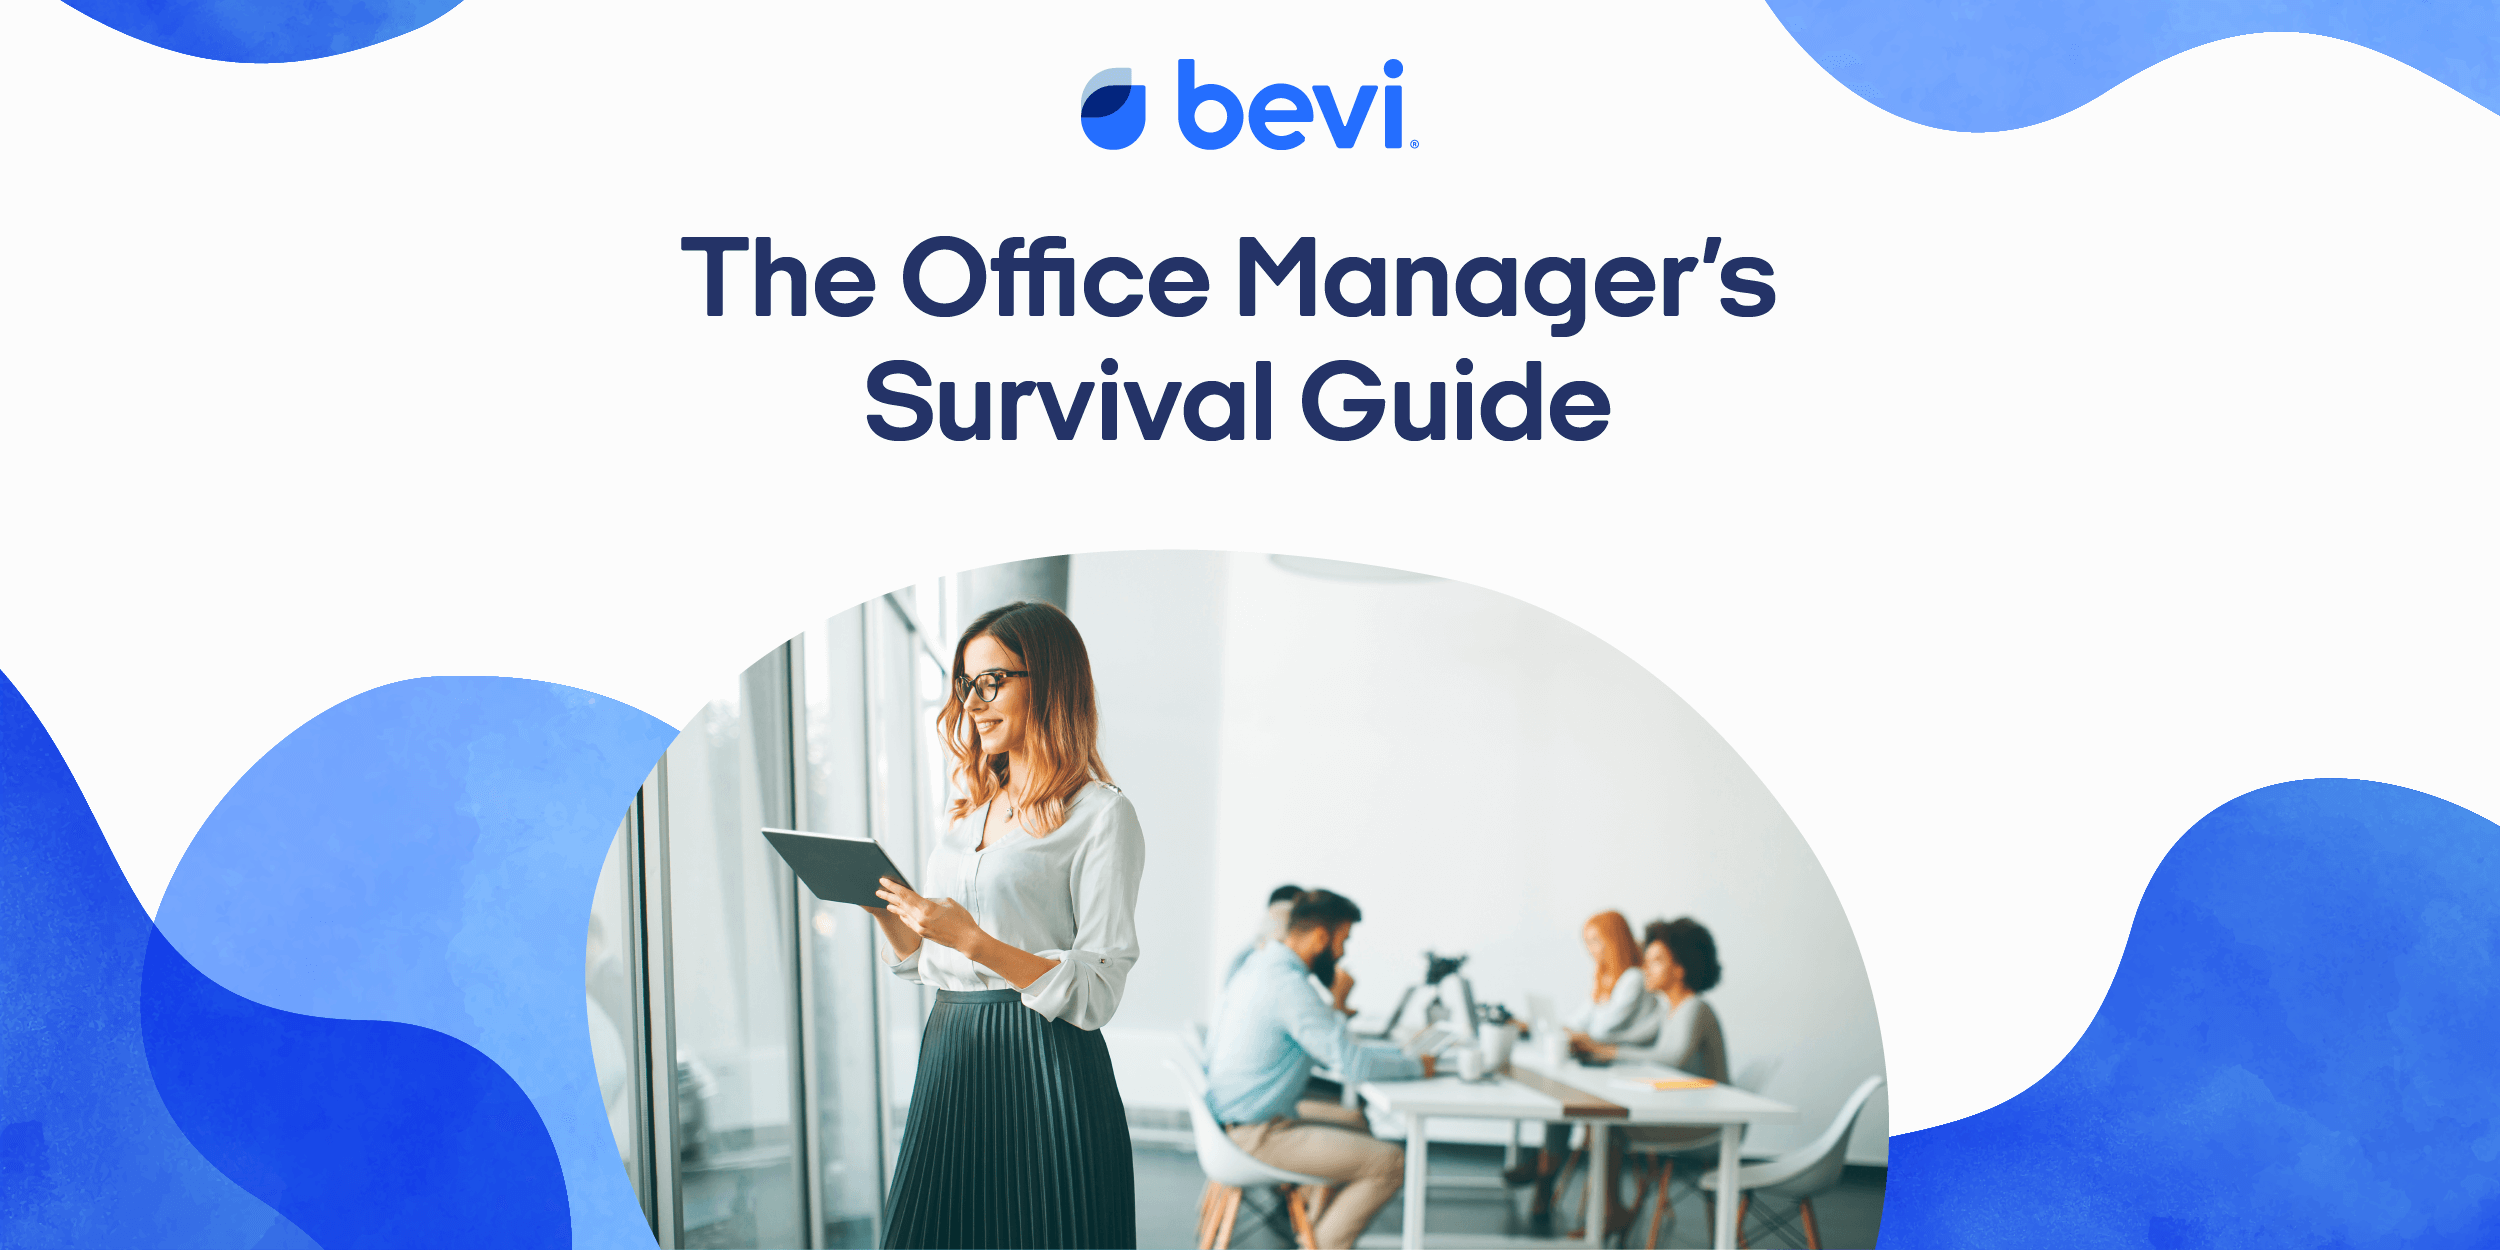 The Office Manager’s Survival Guide